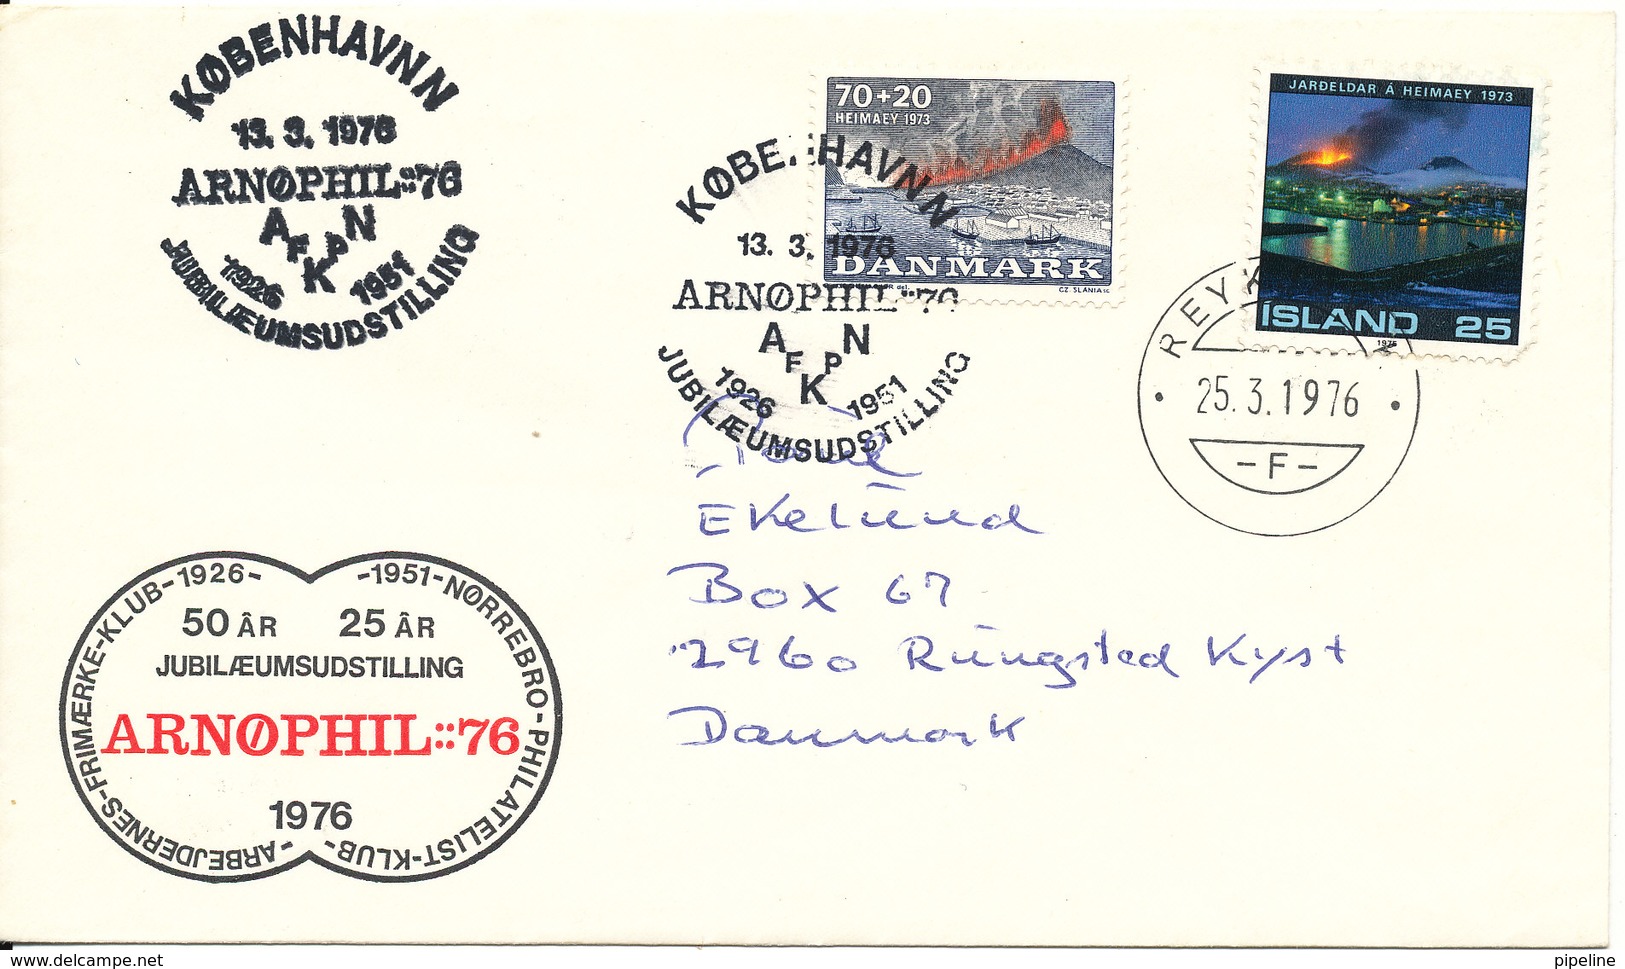 Iceland & Denmark Cover With VOLCANO HEIMAEY EUROPTION 1973 With 2 Different Cancels - Lettres & Documents